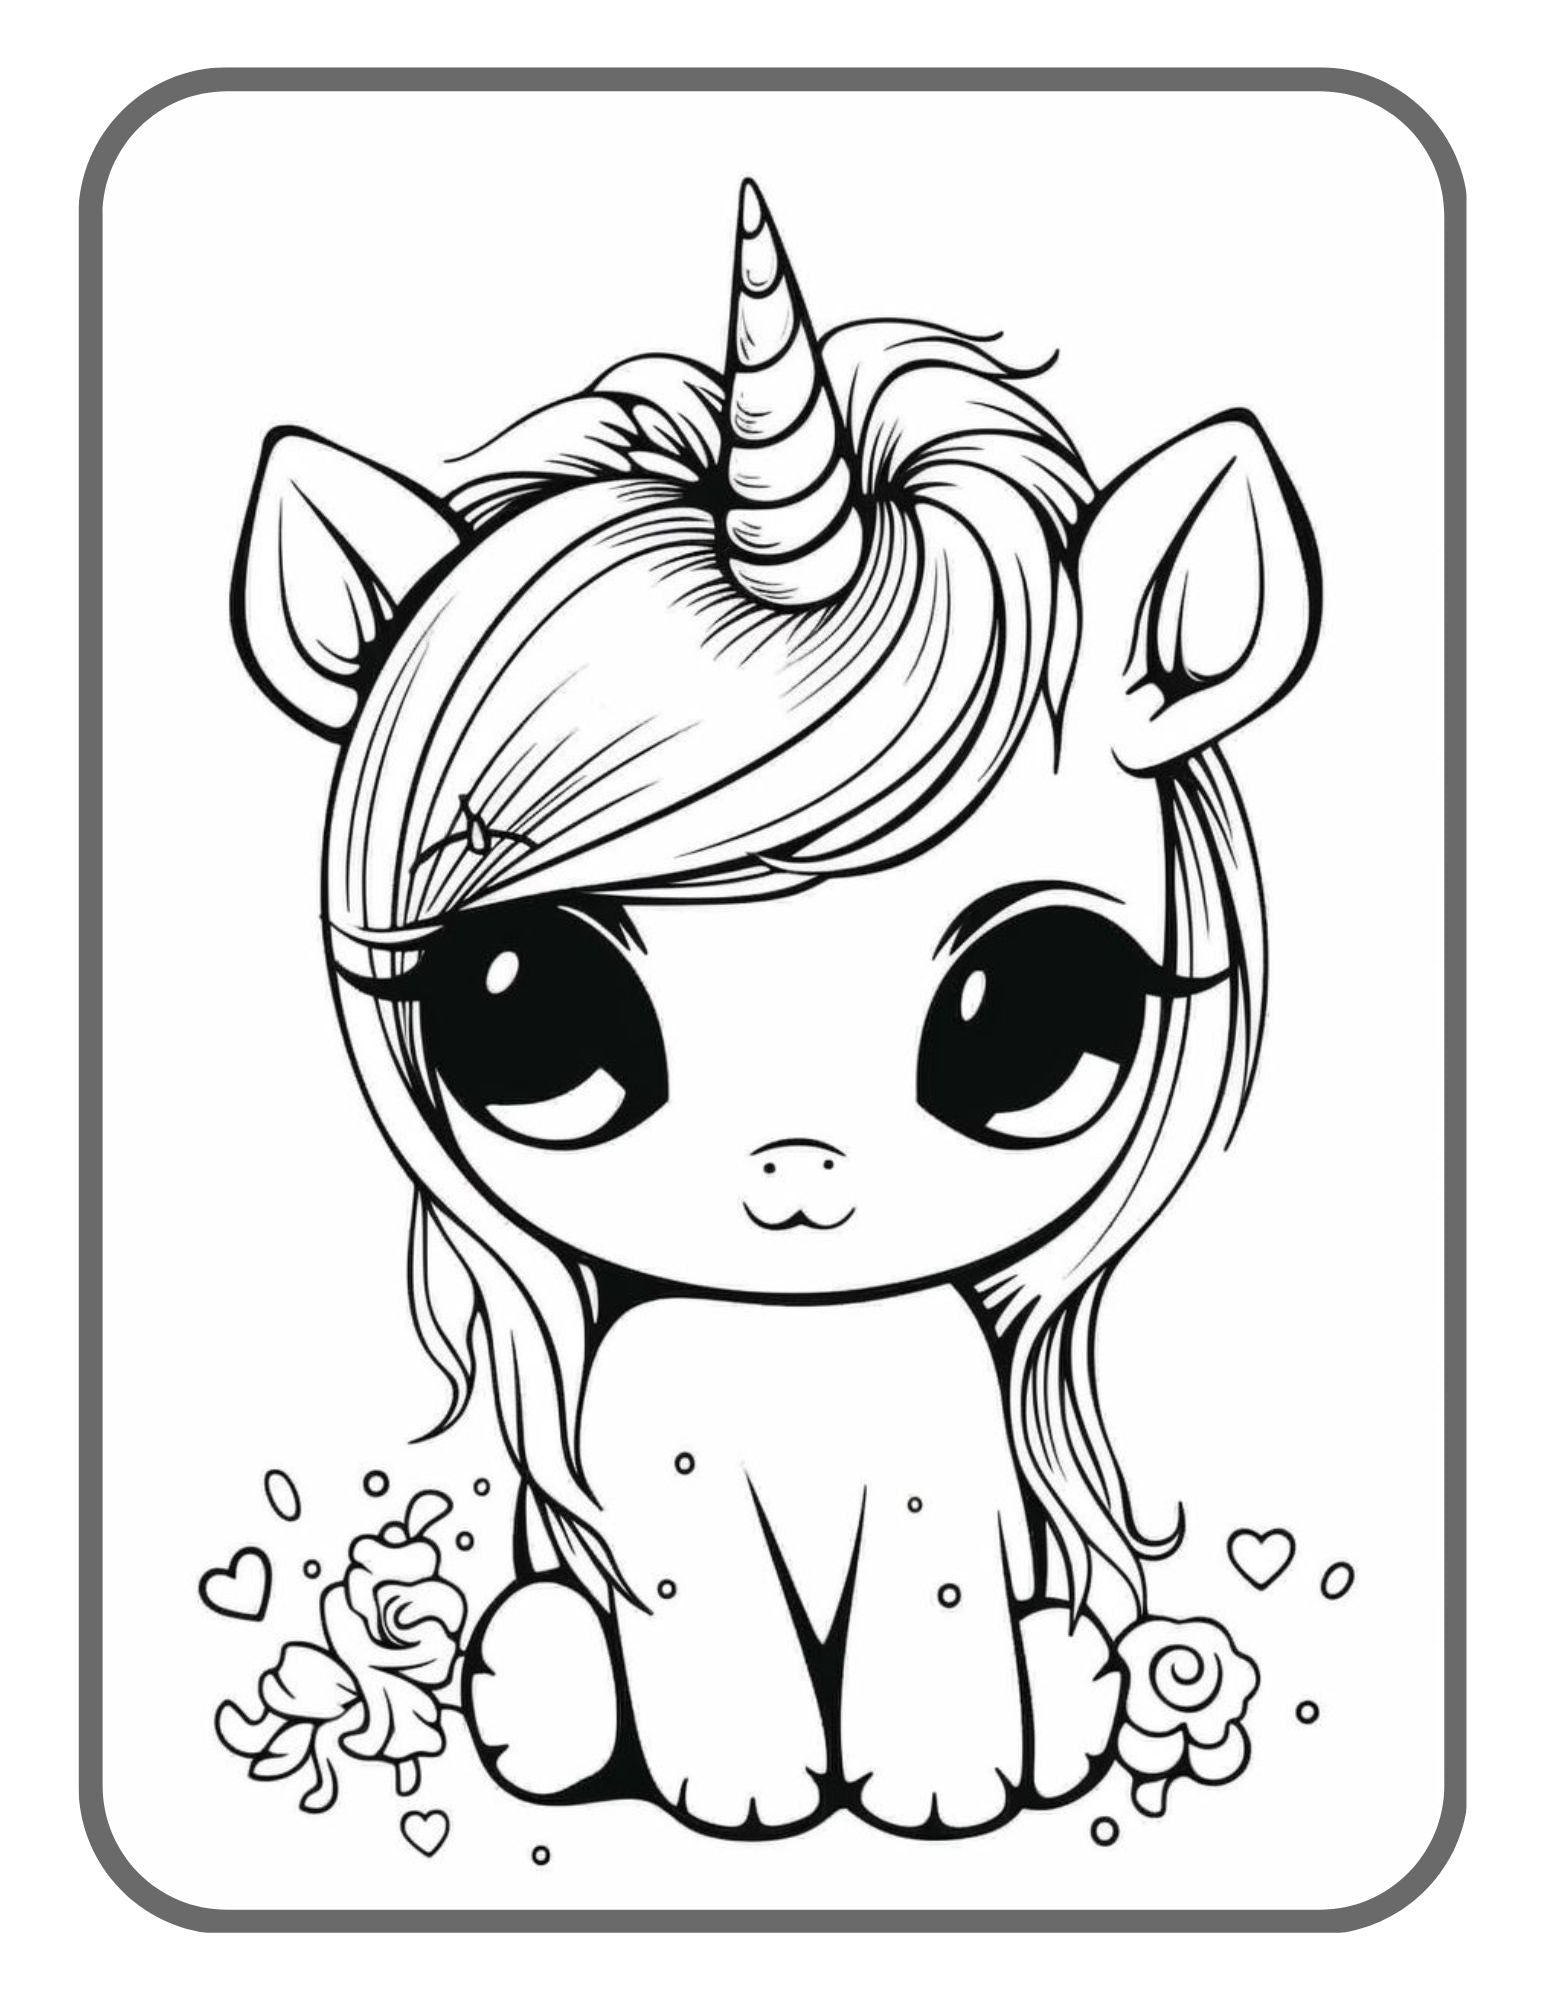 Unicorn Coloring Book for Kids Ages 2-4: Adorable and Unique Design of Coloring  Books Perfectly for Childrens ages 2-4 (Paperback)